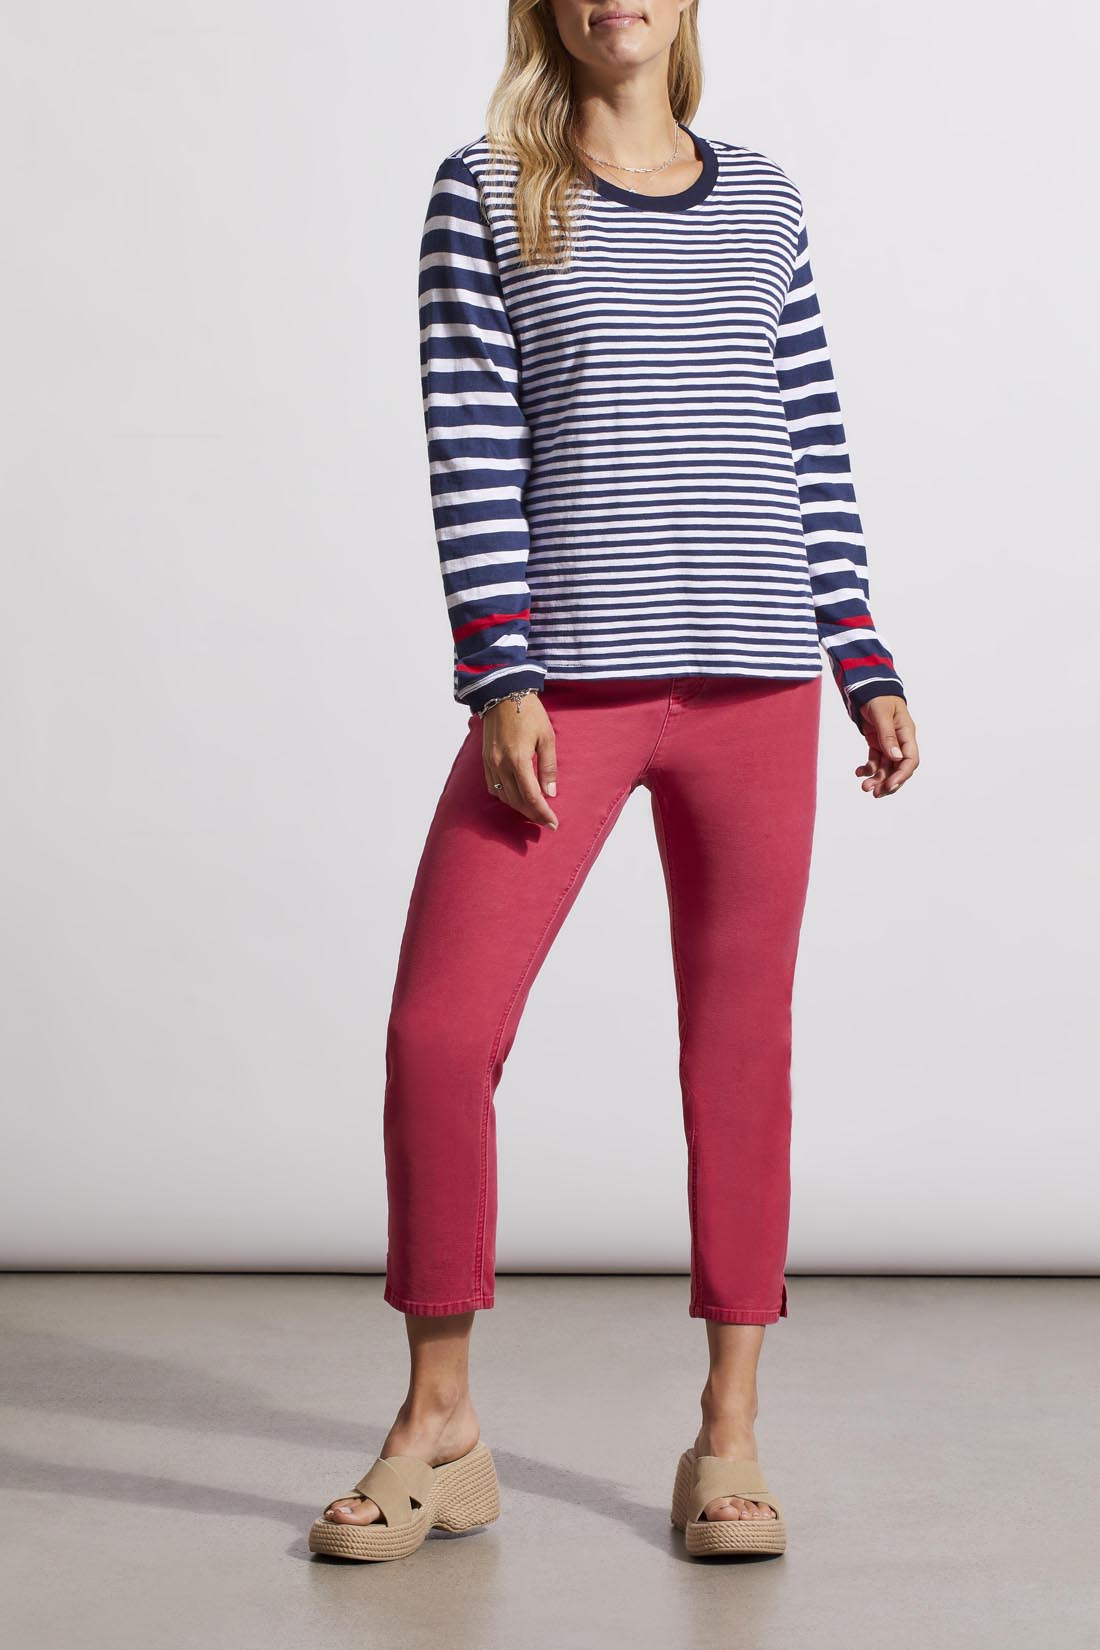 Crew Neck Nautical Striped Top by Tribal